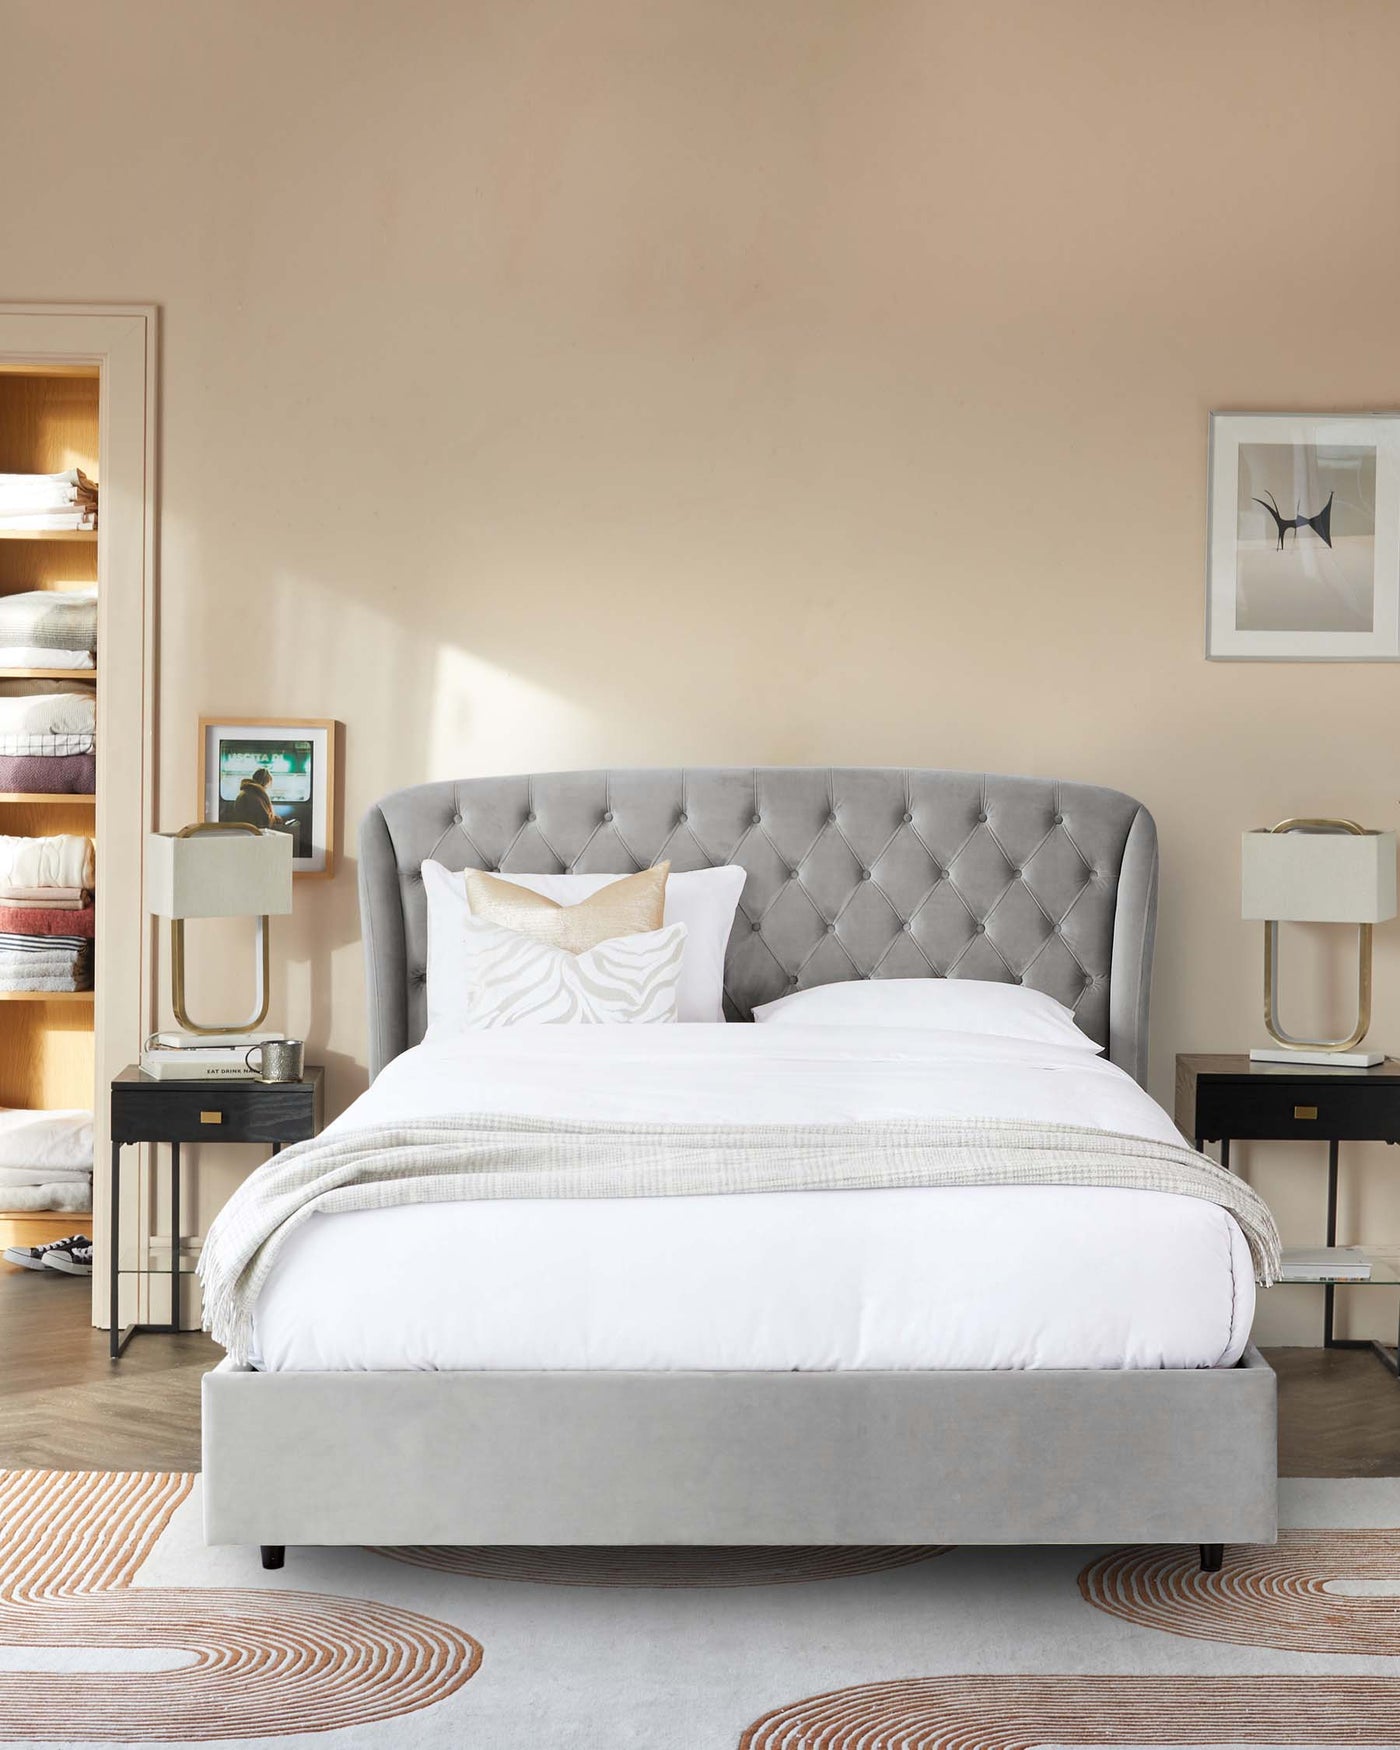 Elegant bedroom furniture showcasing a large upholstered bed with a tufted headboard in a soft grey tone, complete with crisp white bedding and decorative pillows. Flanking the bed are two sleek black nightstands with a drawer and shelf, each holding a contemporary lamp with a rectangular shade. The room is accessorized with a warm-toned area rug featuring curved patterns, adding a sense of luxury and comfort to the space.